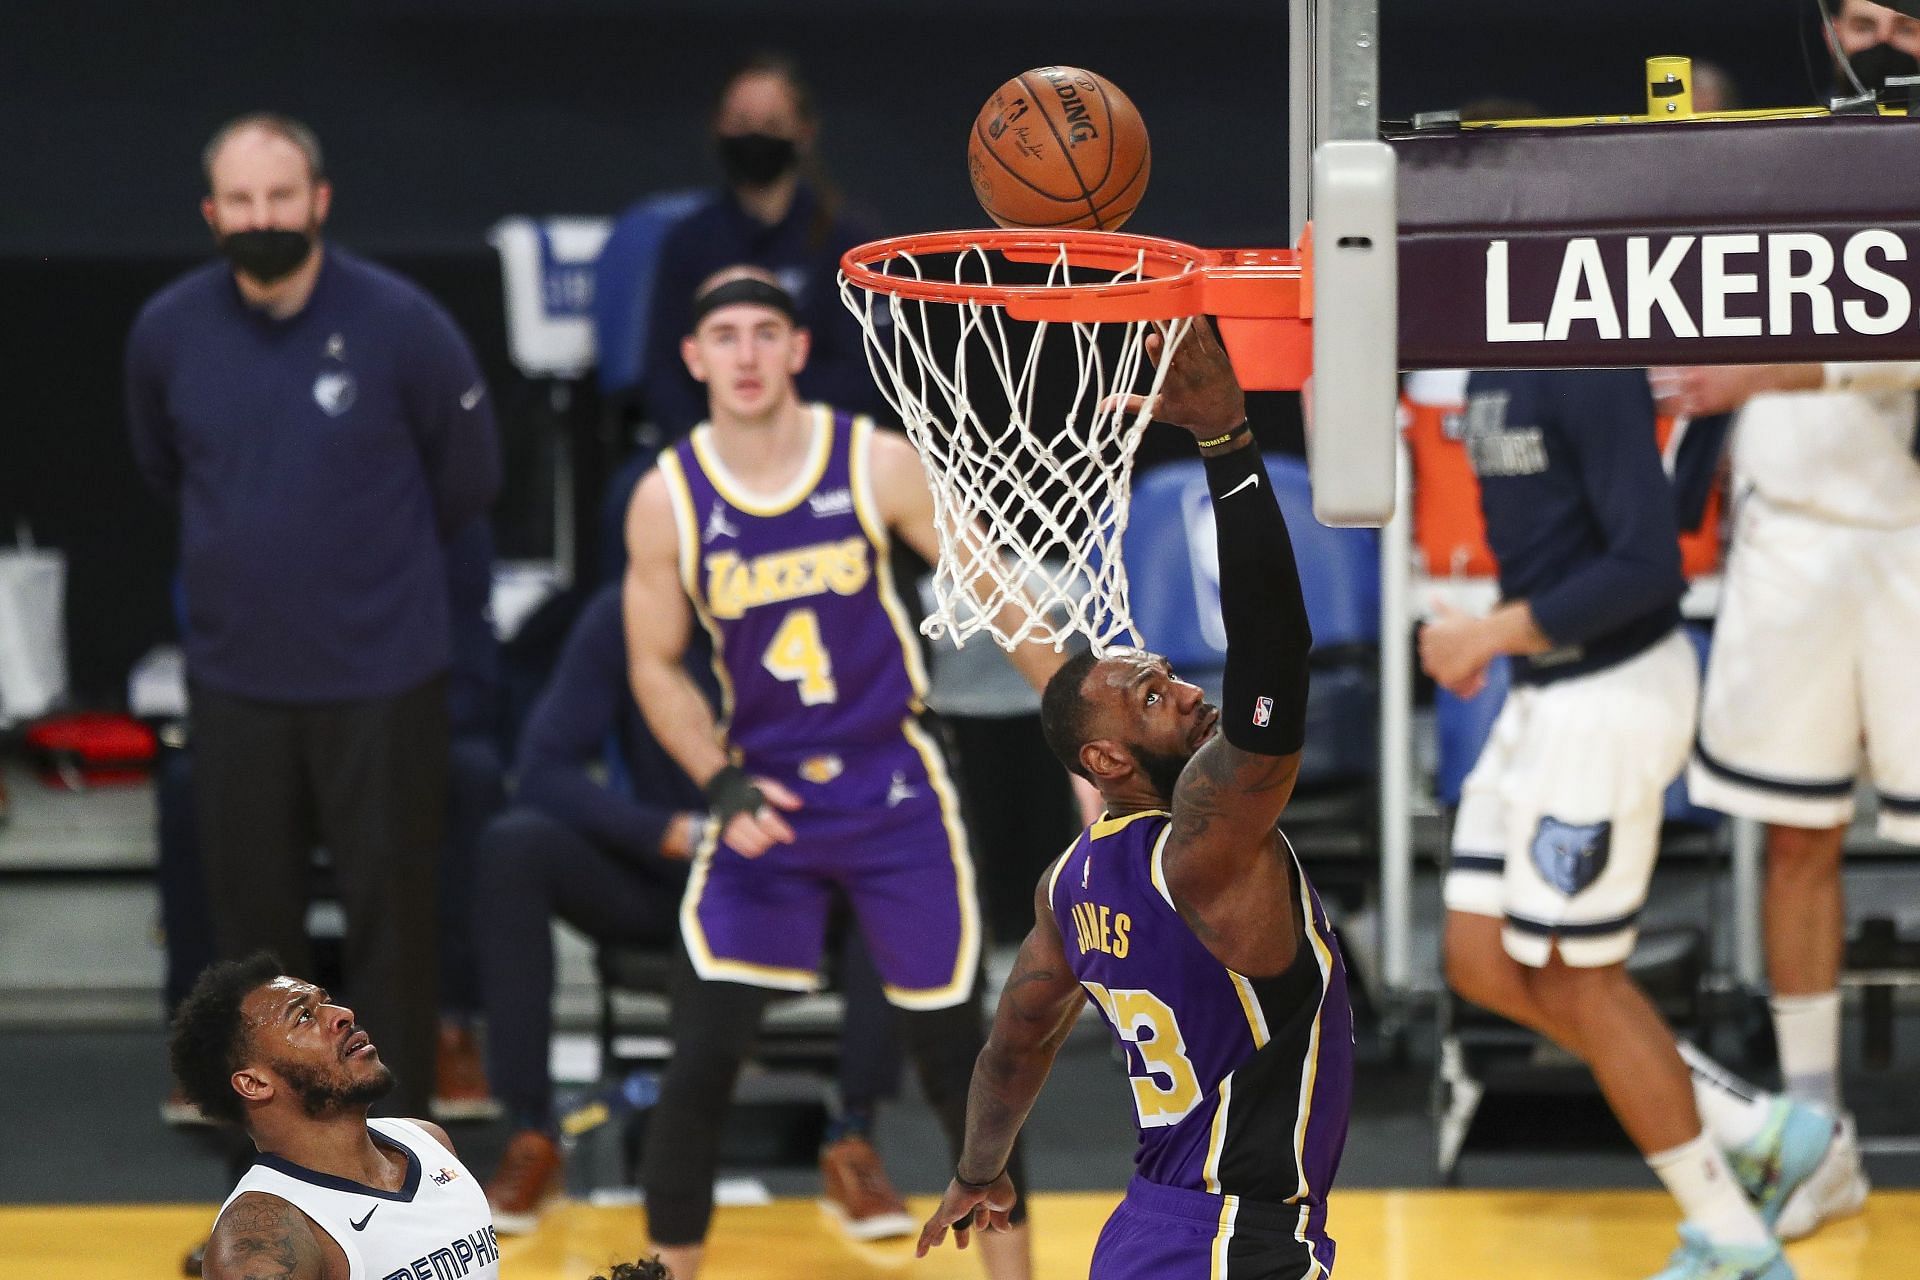 Los Angeles Lakers star LeBron James lays it in against the Memphis Grizzlies in the 2020-21 NBA season